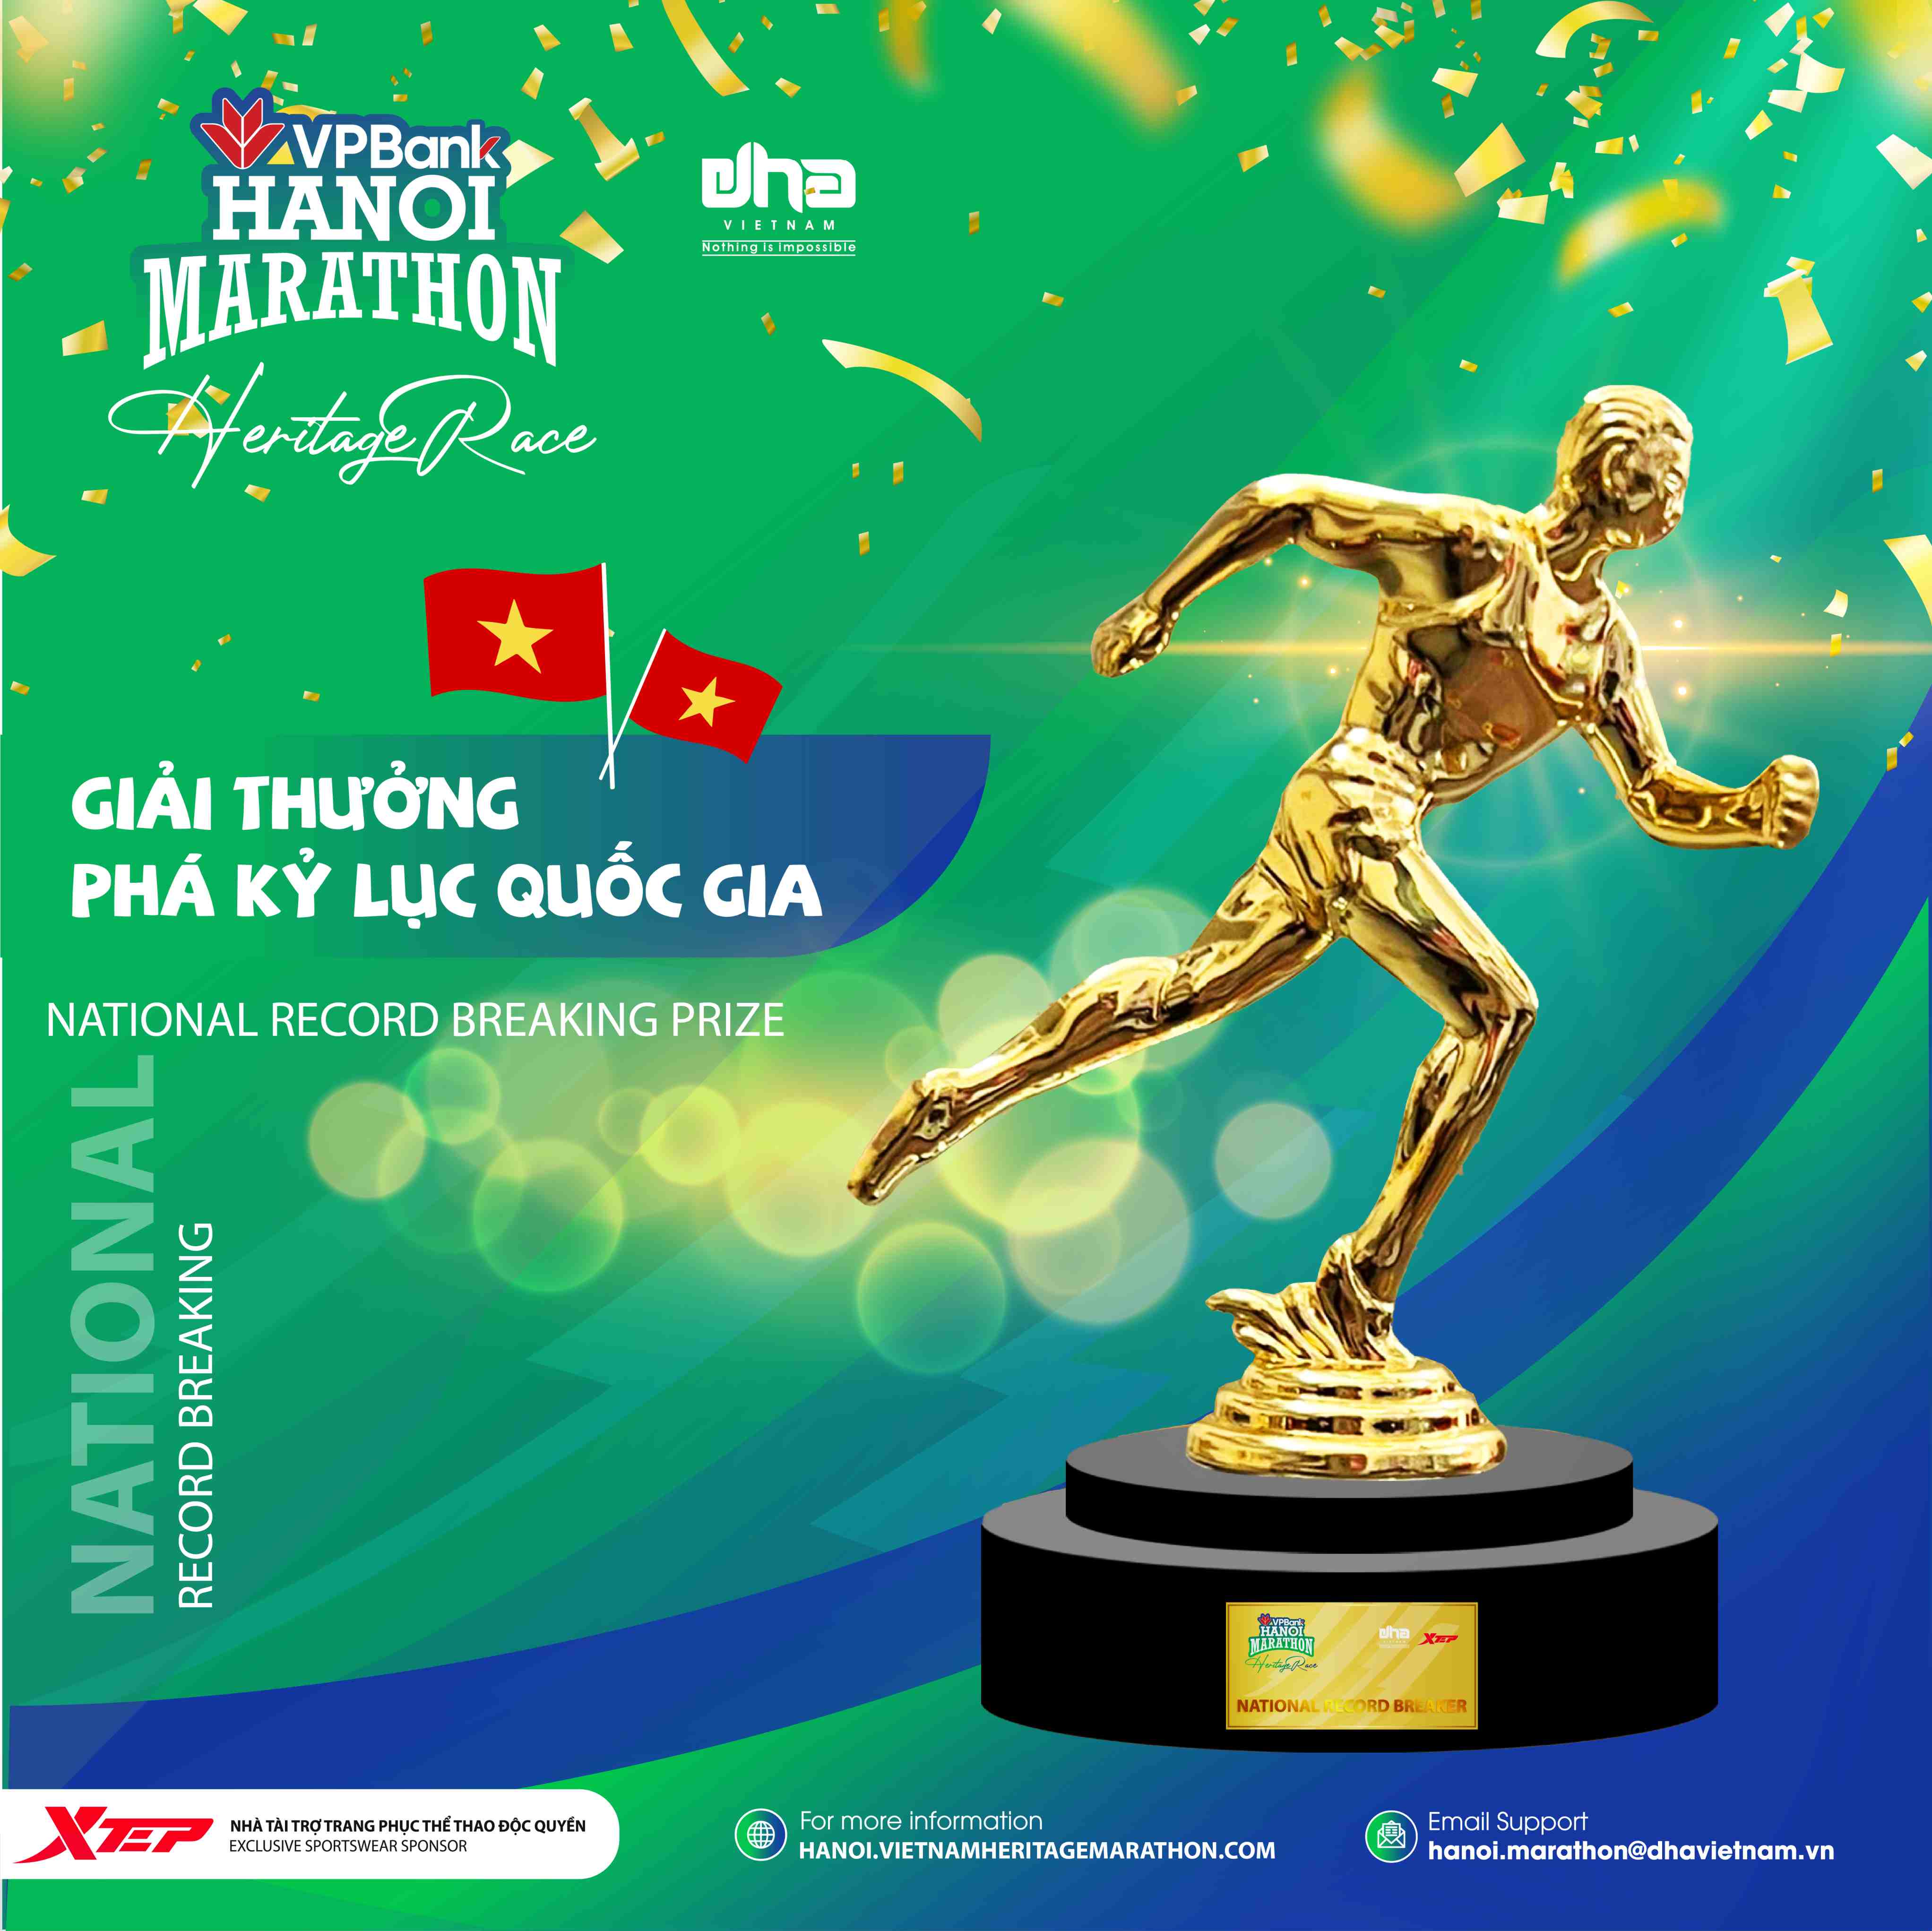 VPBank Hanoi Marathon 2022: National Record Breaking Prize And 'Golden Running Step' Cup